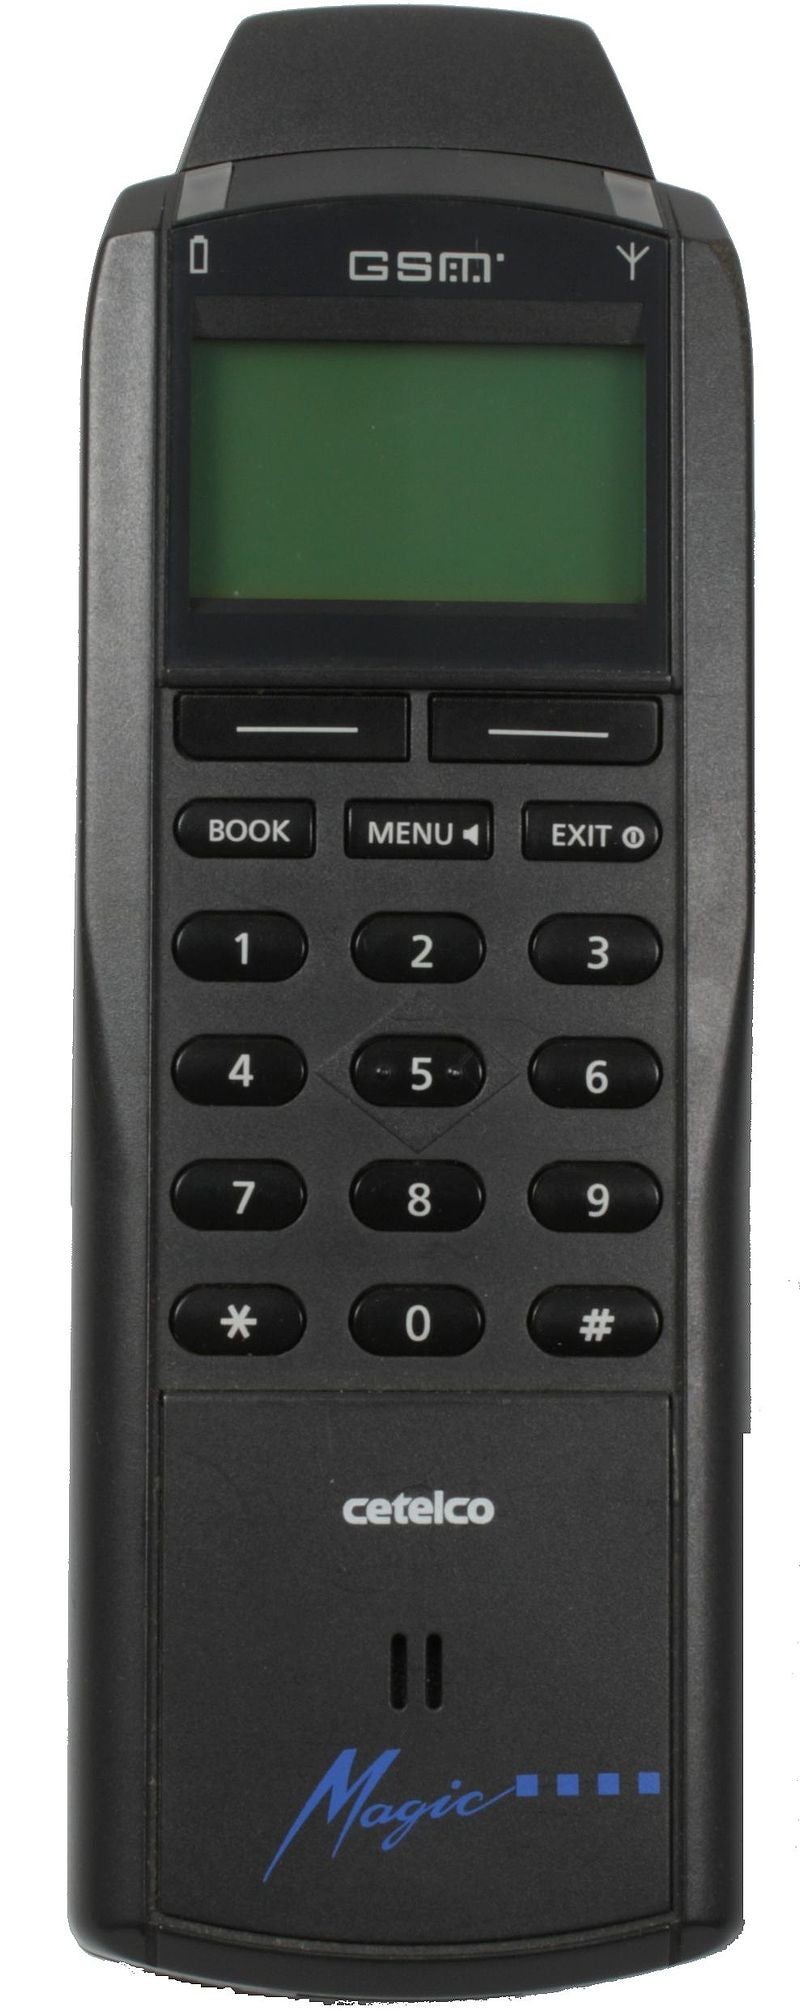 Hagenuk MT-2000 - Did you know: Nokia's Snake is not the world's first mobile game